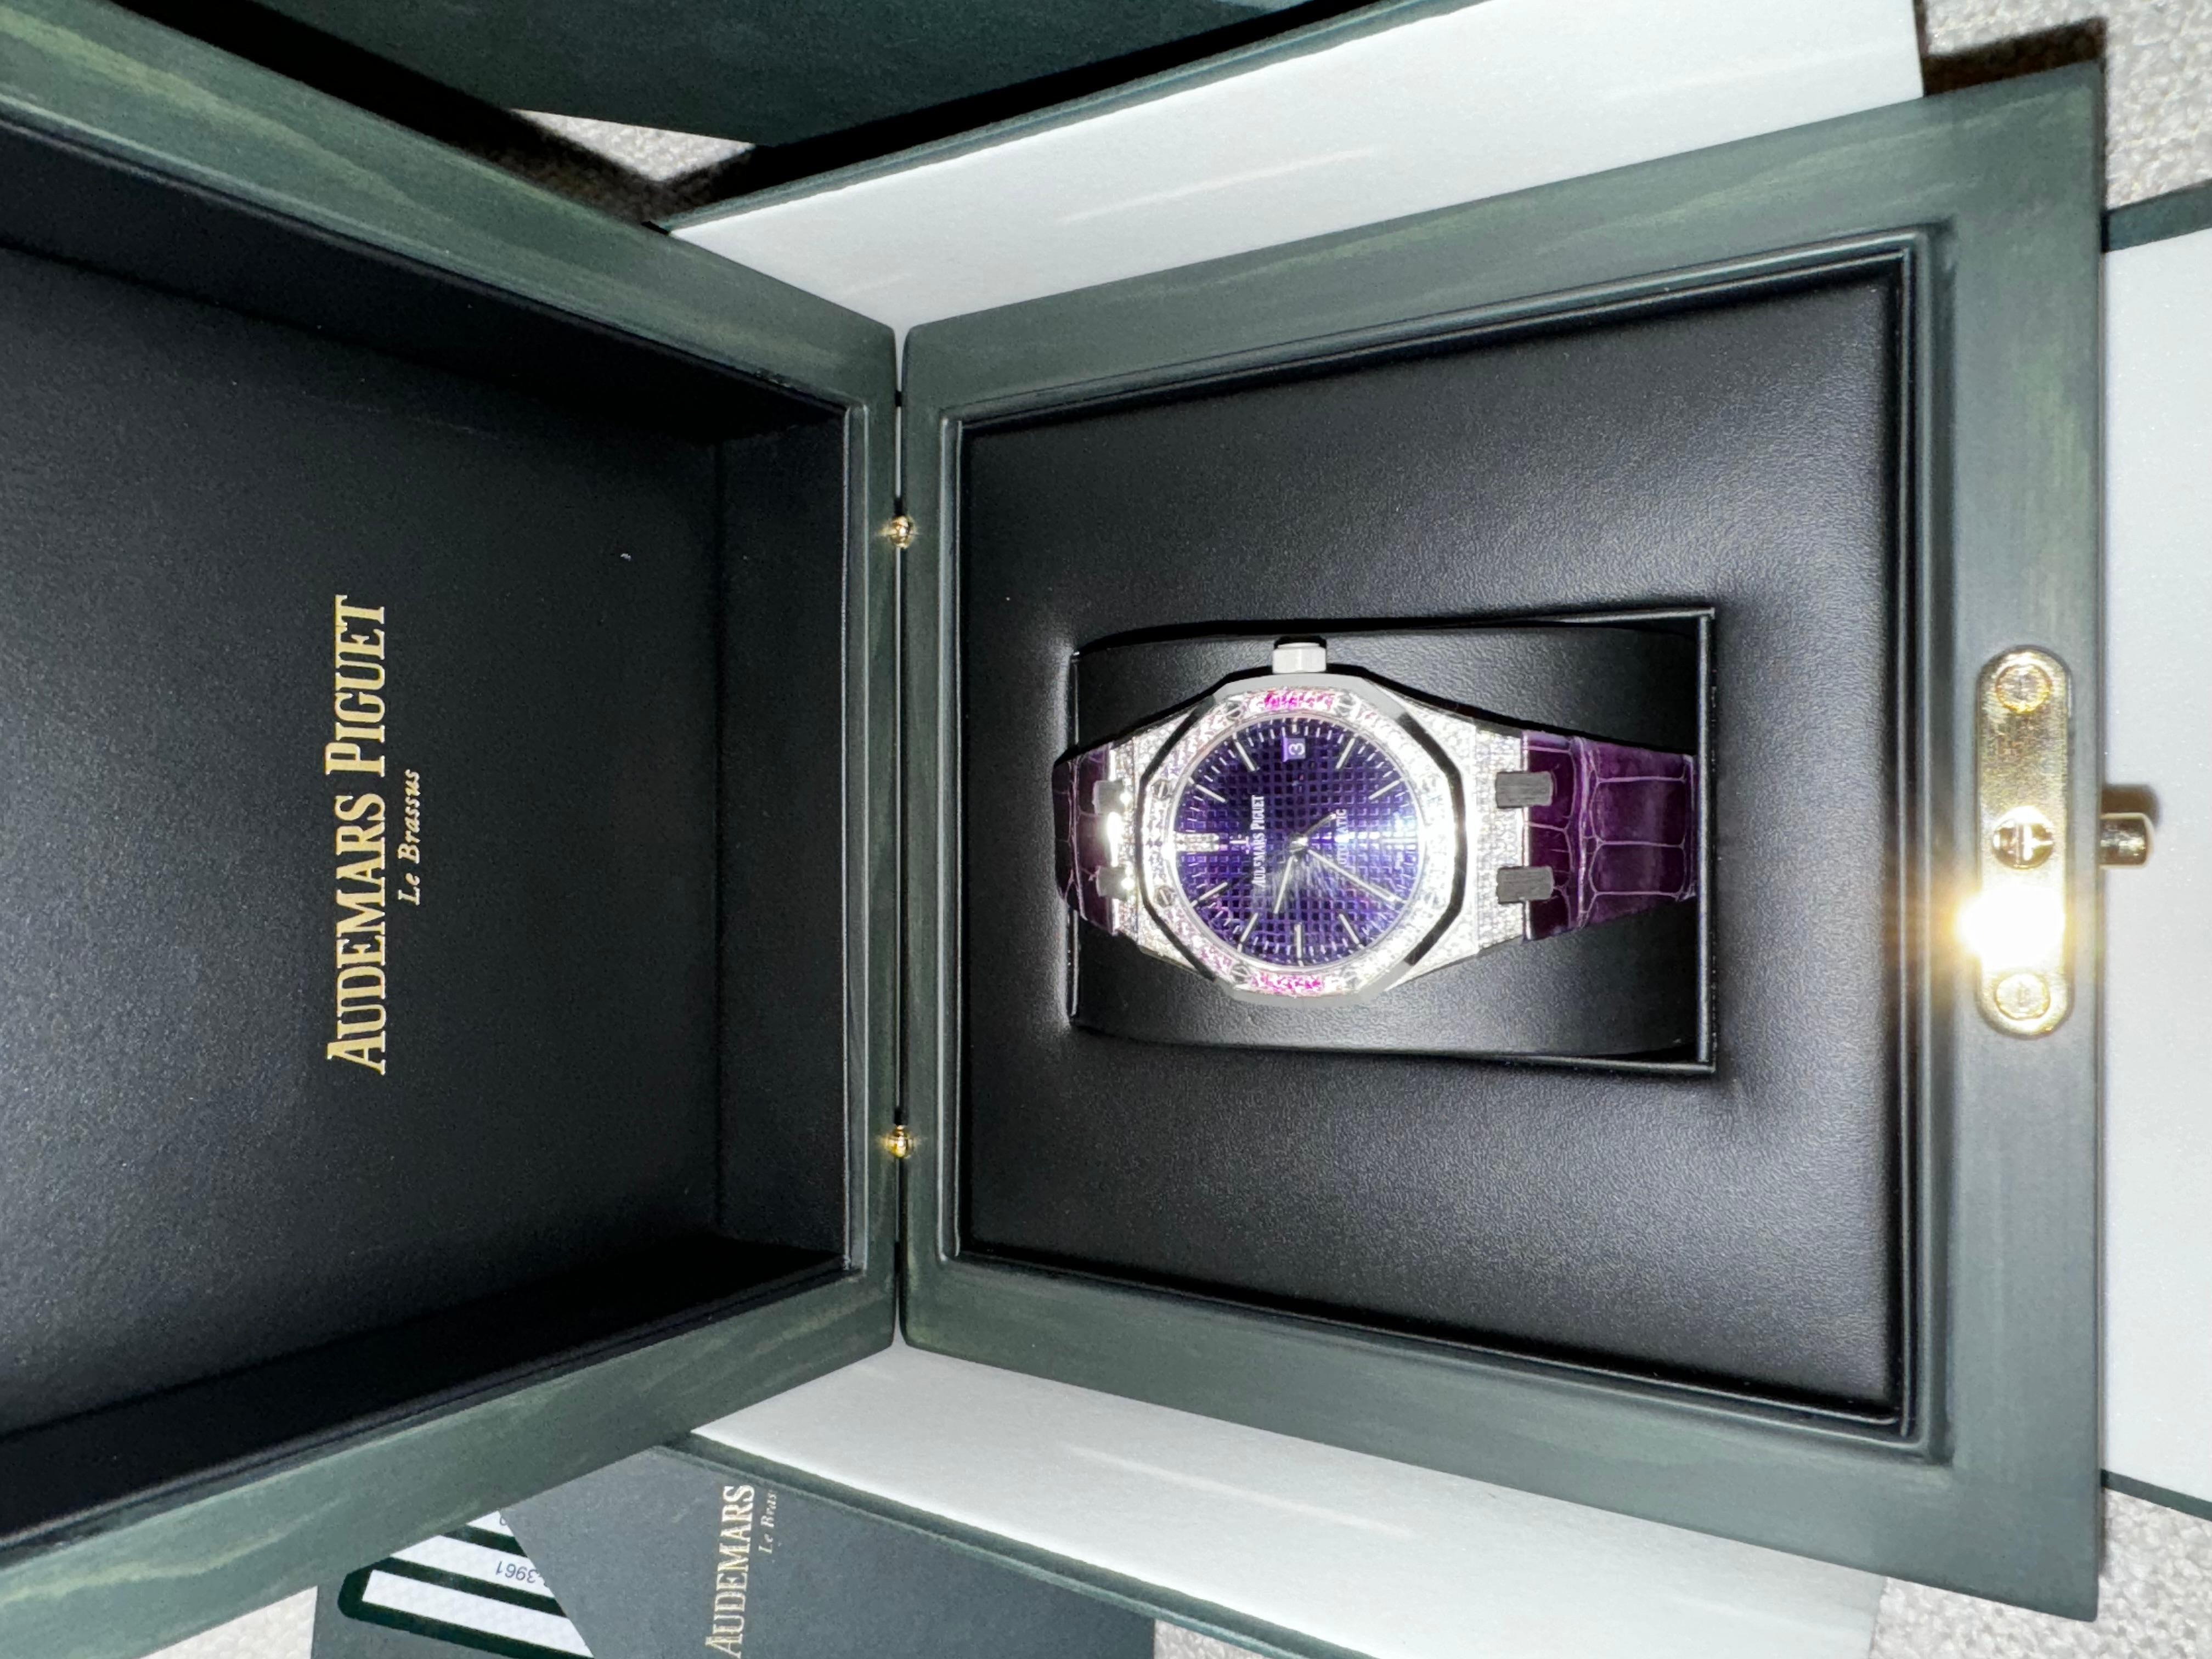 Audemars Piguet Royal Oak 37m Purple Dial  Limited Edition 100 pieces worldwide. Very exclusive beauty. Comes with or original box and card. 
Brilliant-cut sapphires in graded hues of pink and blue adorn the white gold bezel and illuminate the